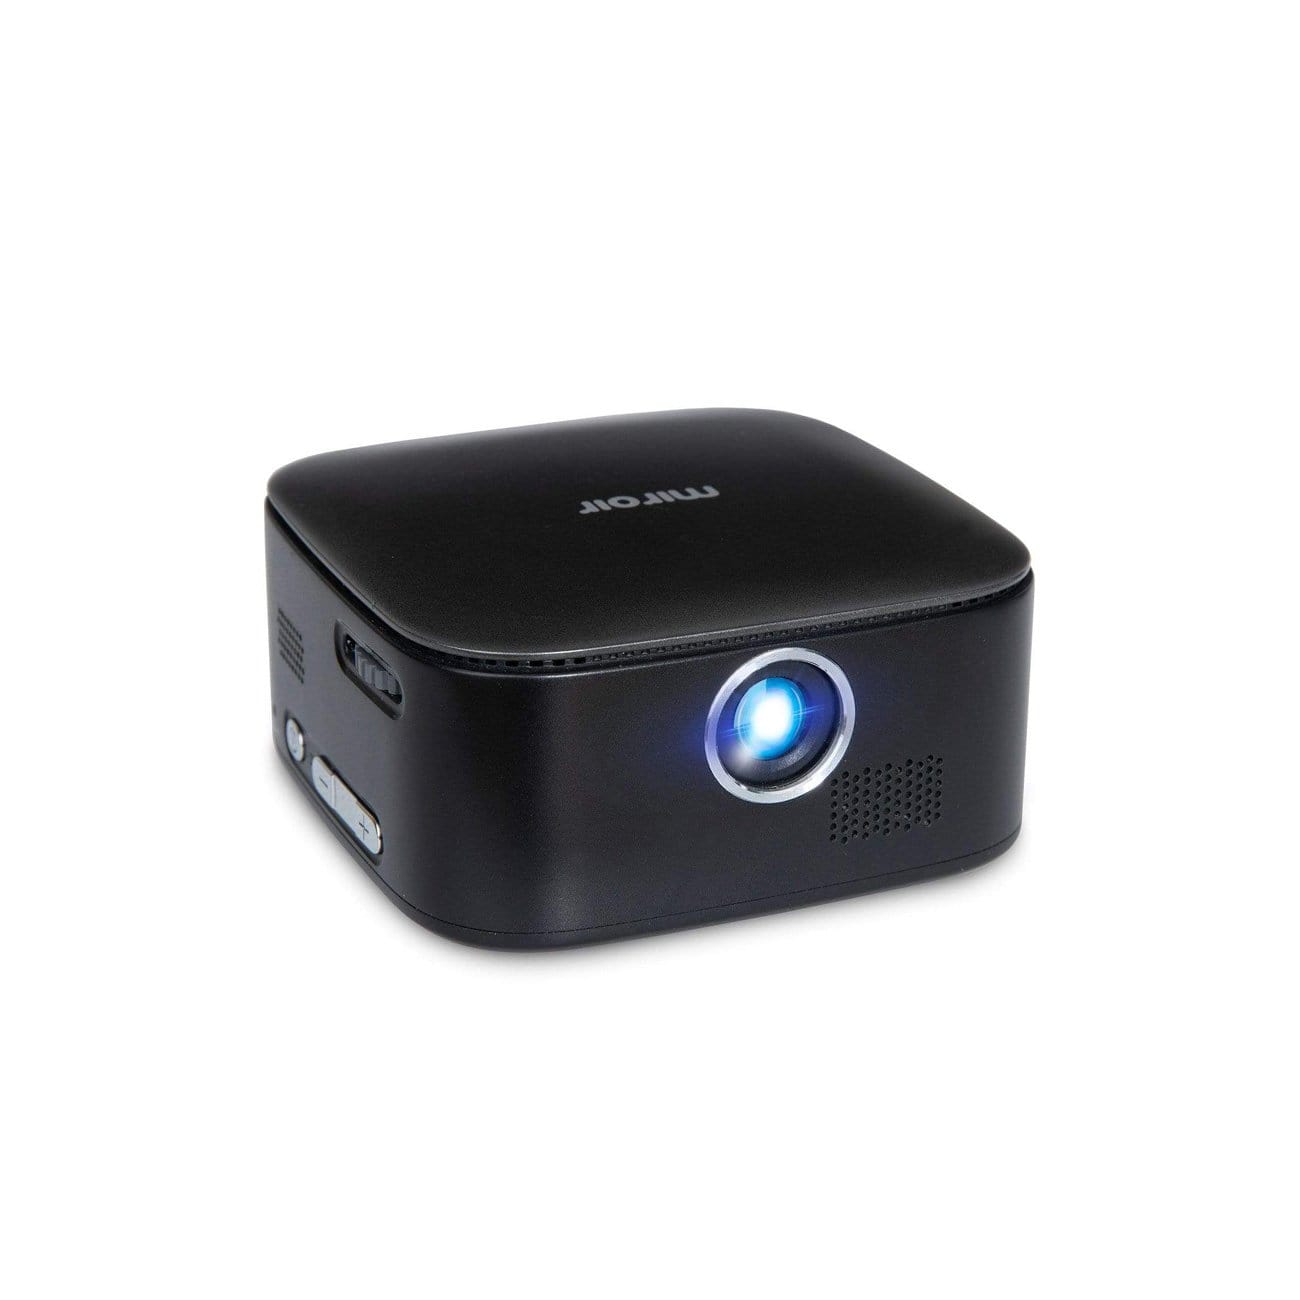 The Miroir M75 is a pocket-sized projector with built-in HDMI perfect for watching videos, sharing photos, movie nights, and outdoor events